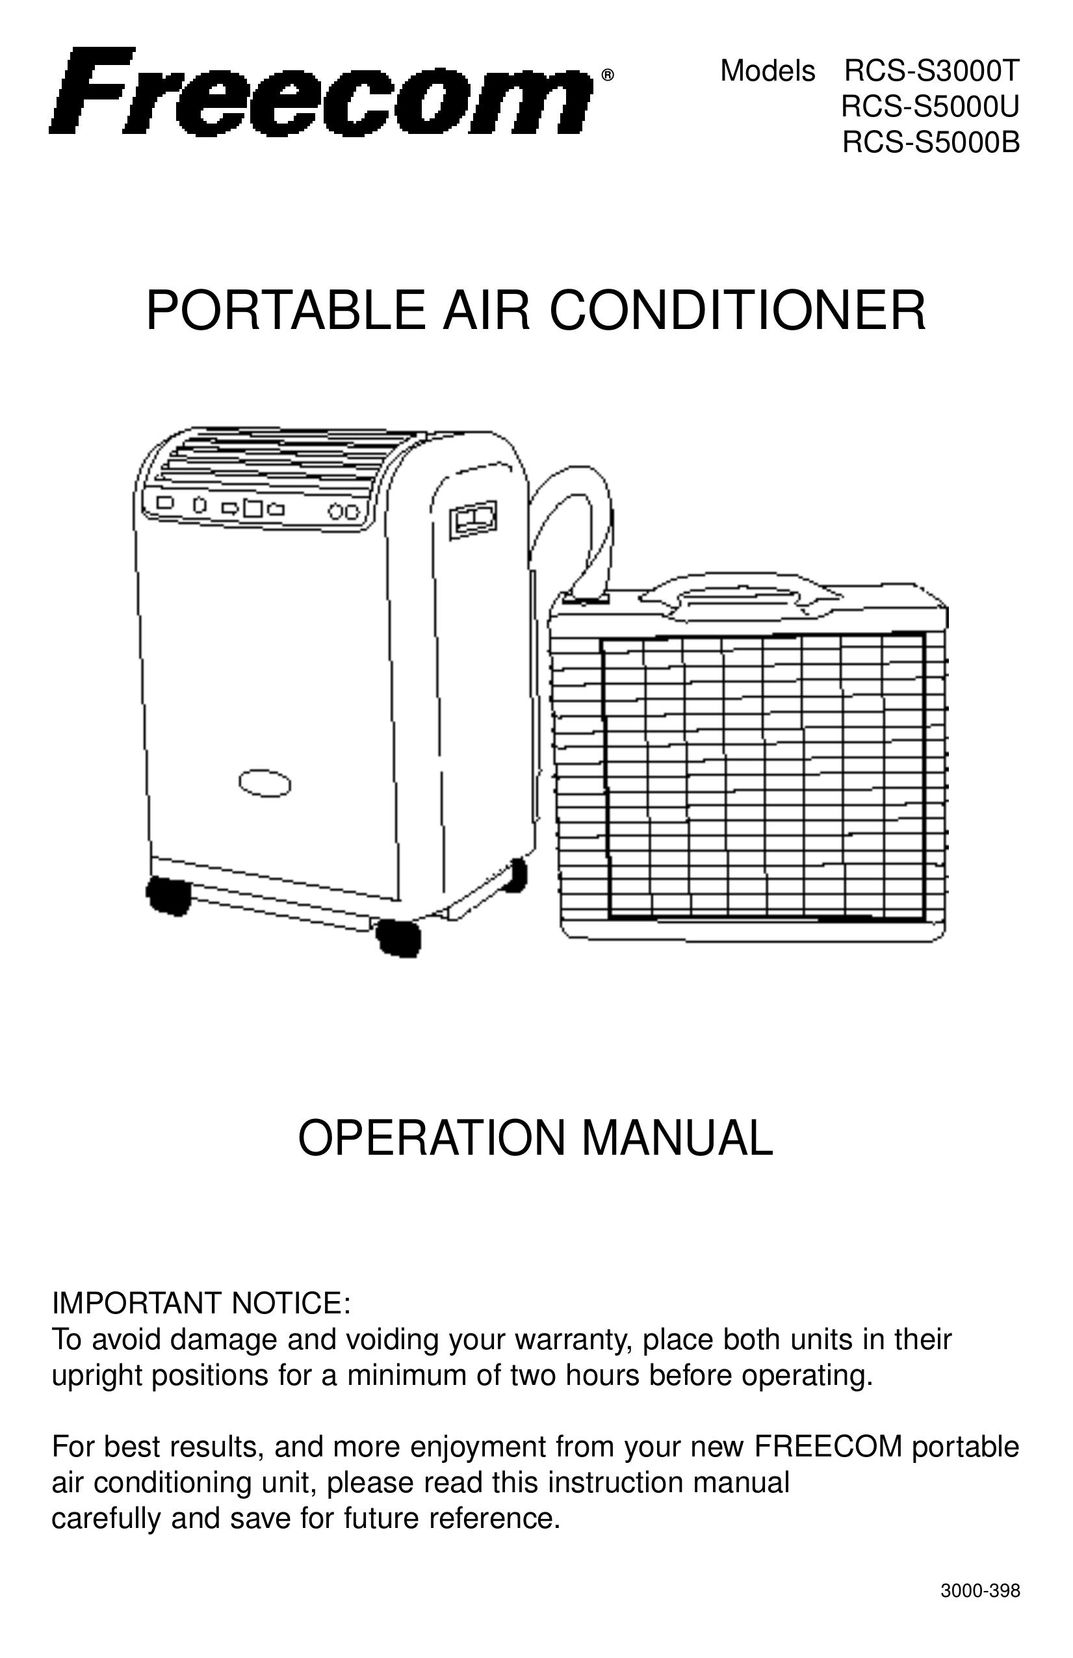 Freecom Technologies RCS-S5000B Air Conditioner User Manual (Page 1)